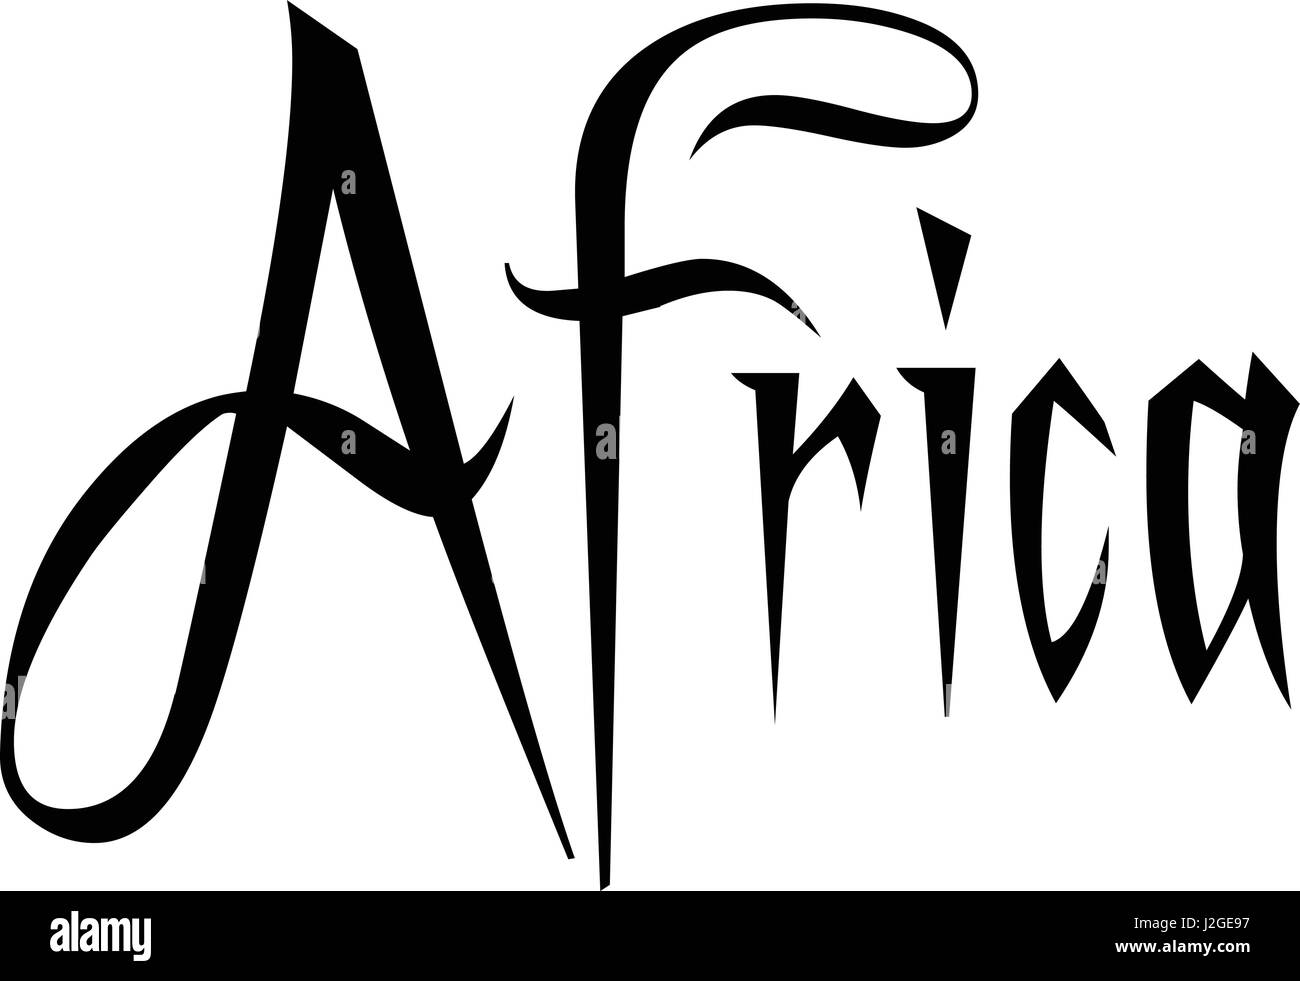 Arfrica Text Sign illustration on white Background Stock Vector